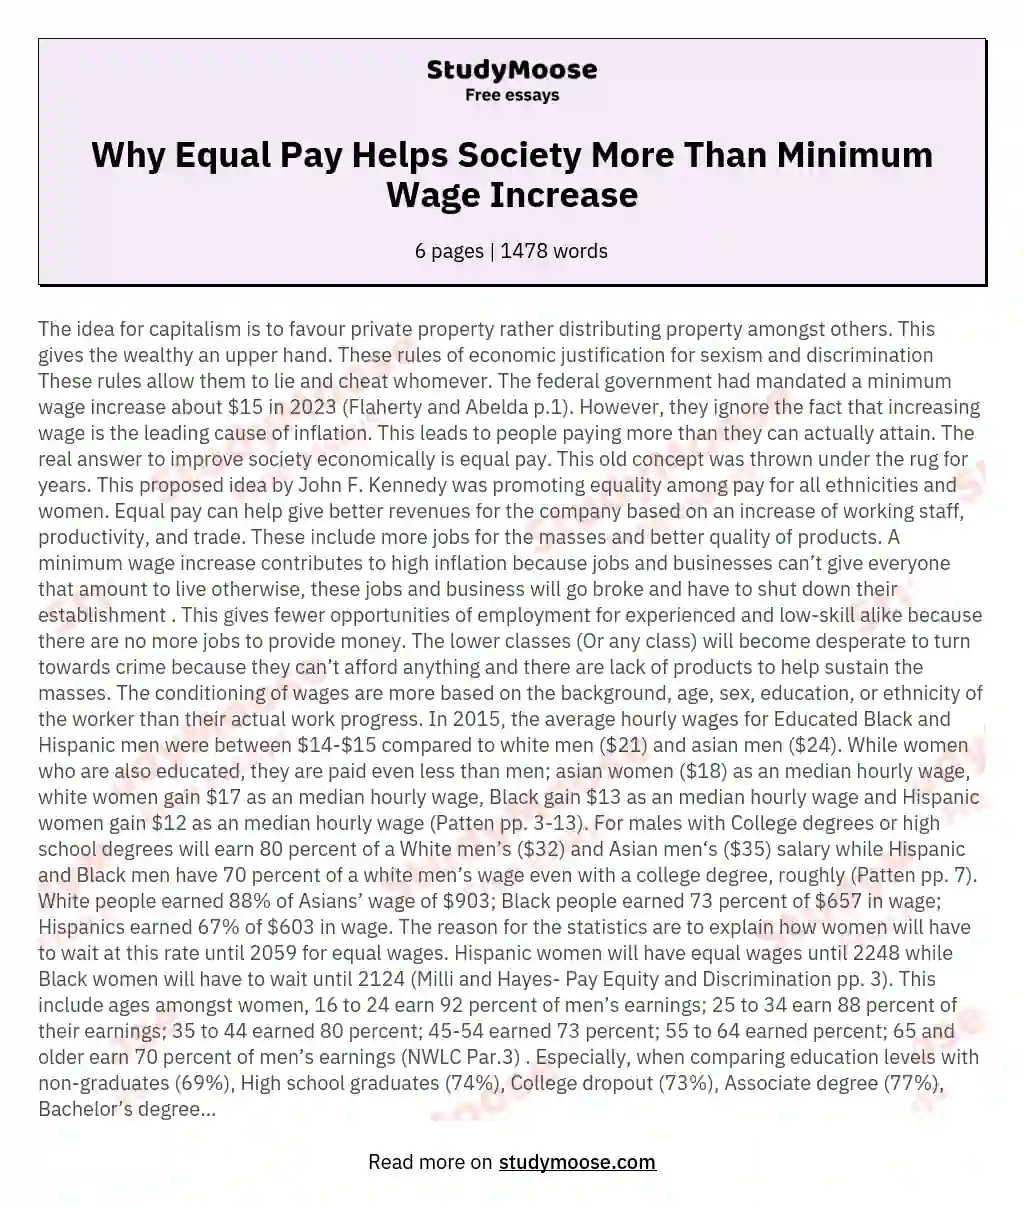 Why Equal Pay Helps Society More Than Minimum Wage Increase